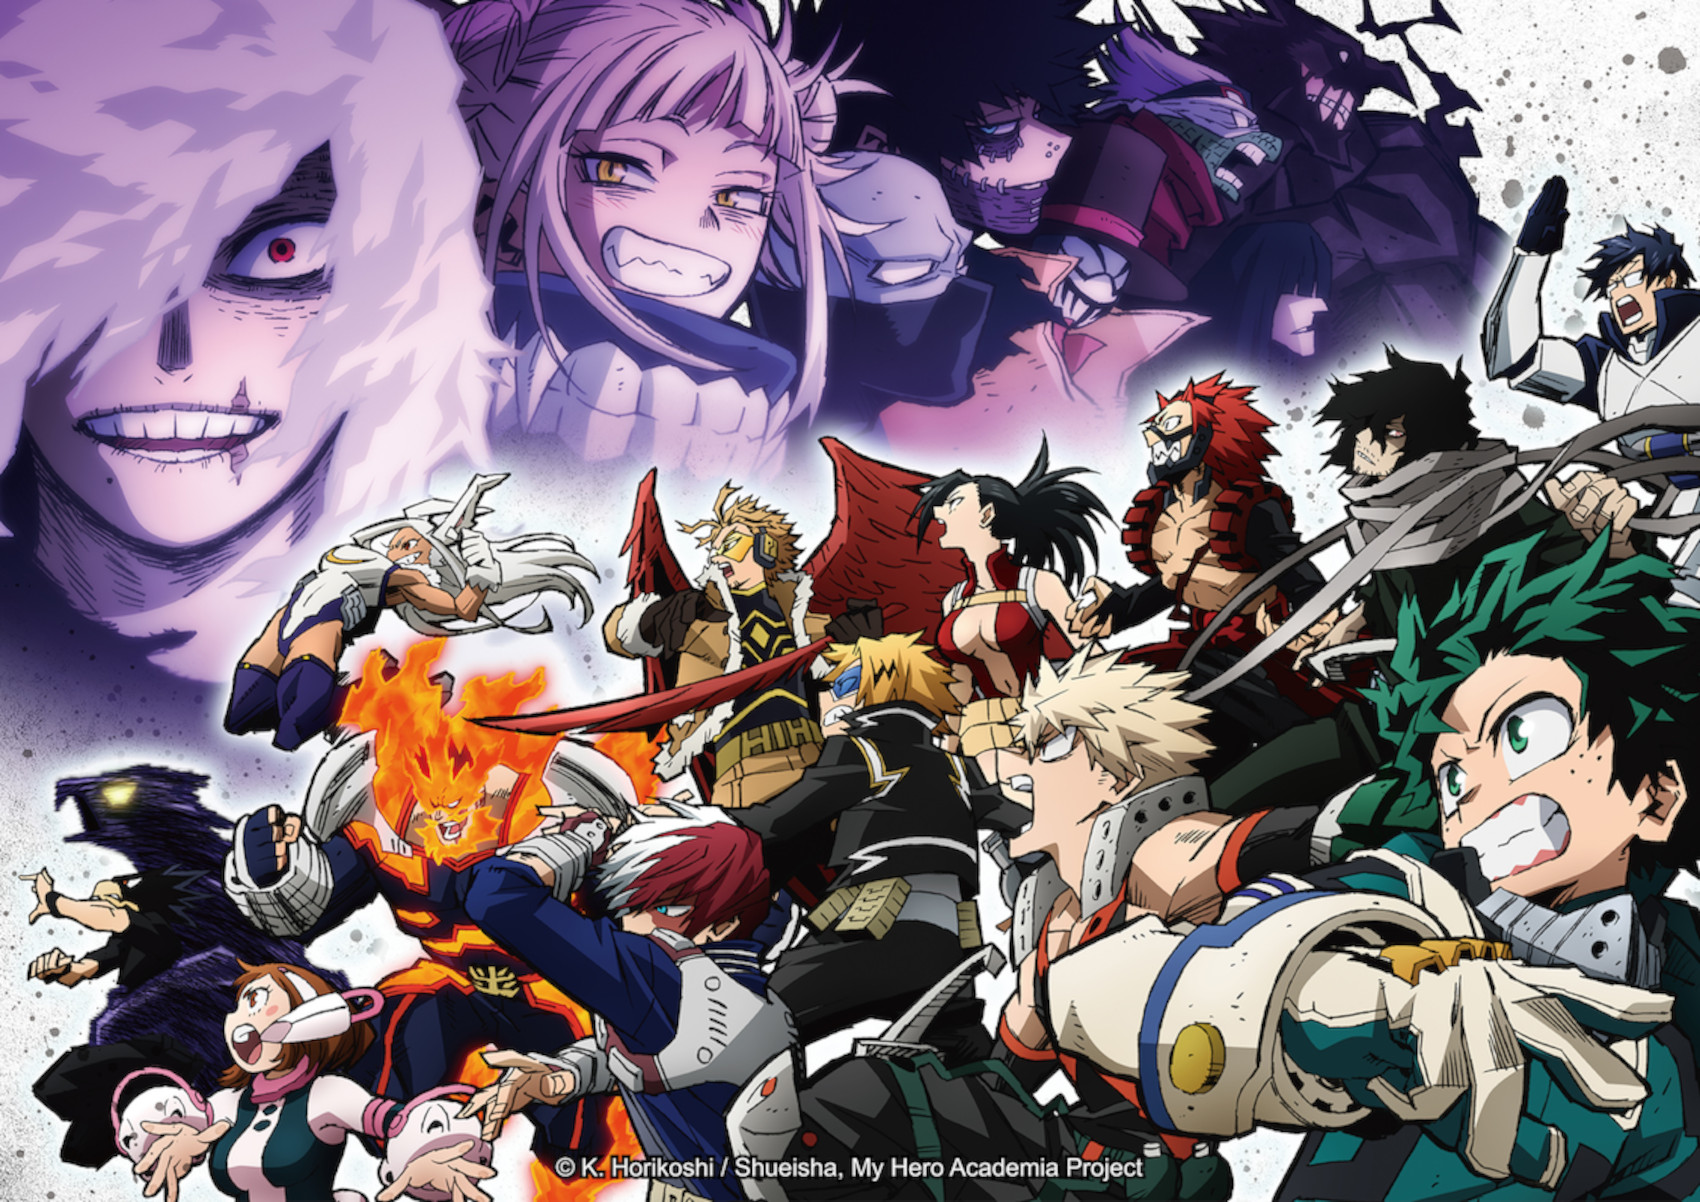 Key art for 'My Hero Academia' Season 6 released at Crunchyroll Expo 2022. It sees Class 1-A and the Pro Heroes looking ready to fight, and Shigaraki and the villains are in the background.